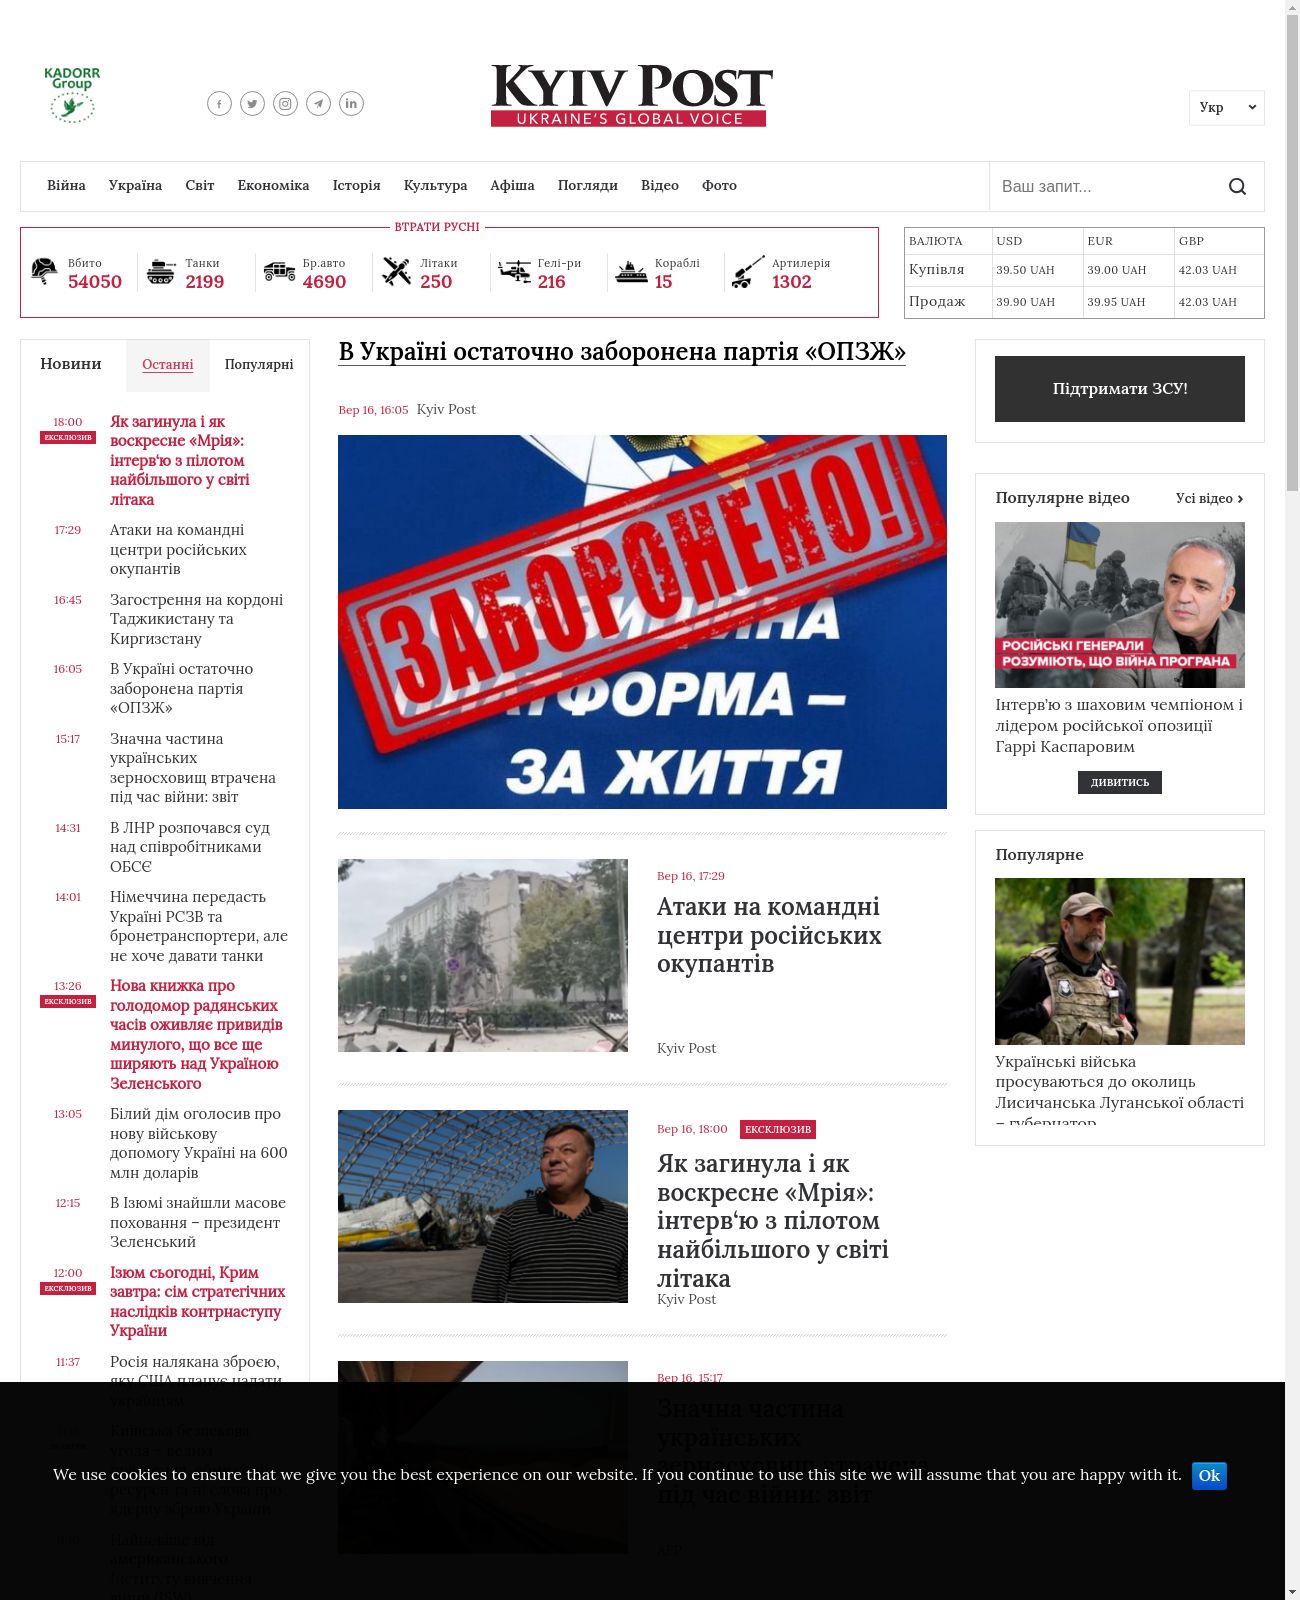 KyivPost at 2022-09-17 02:53:24+03:00 local time